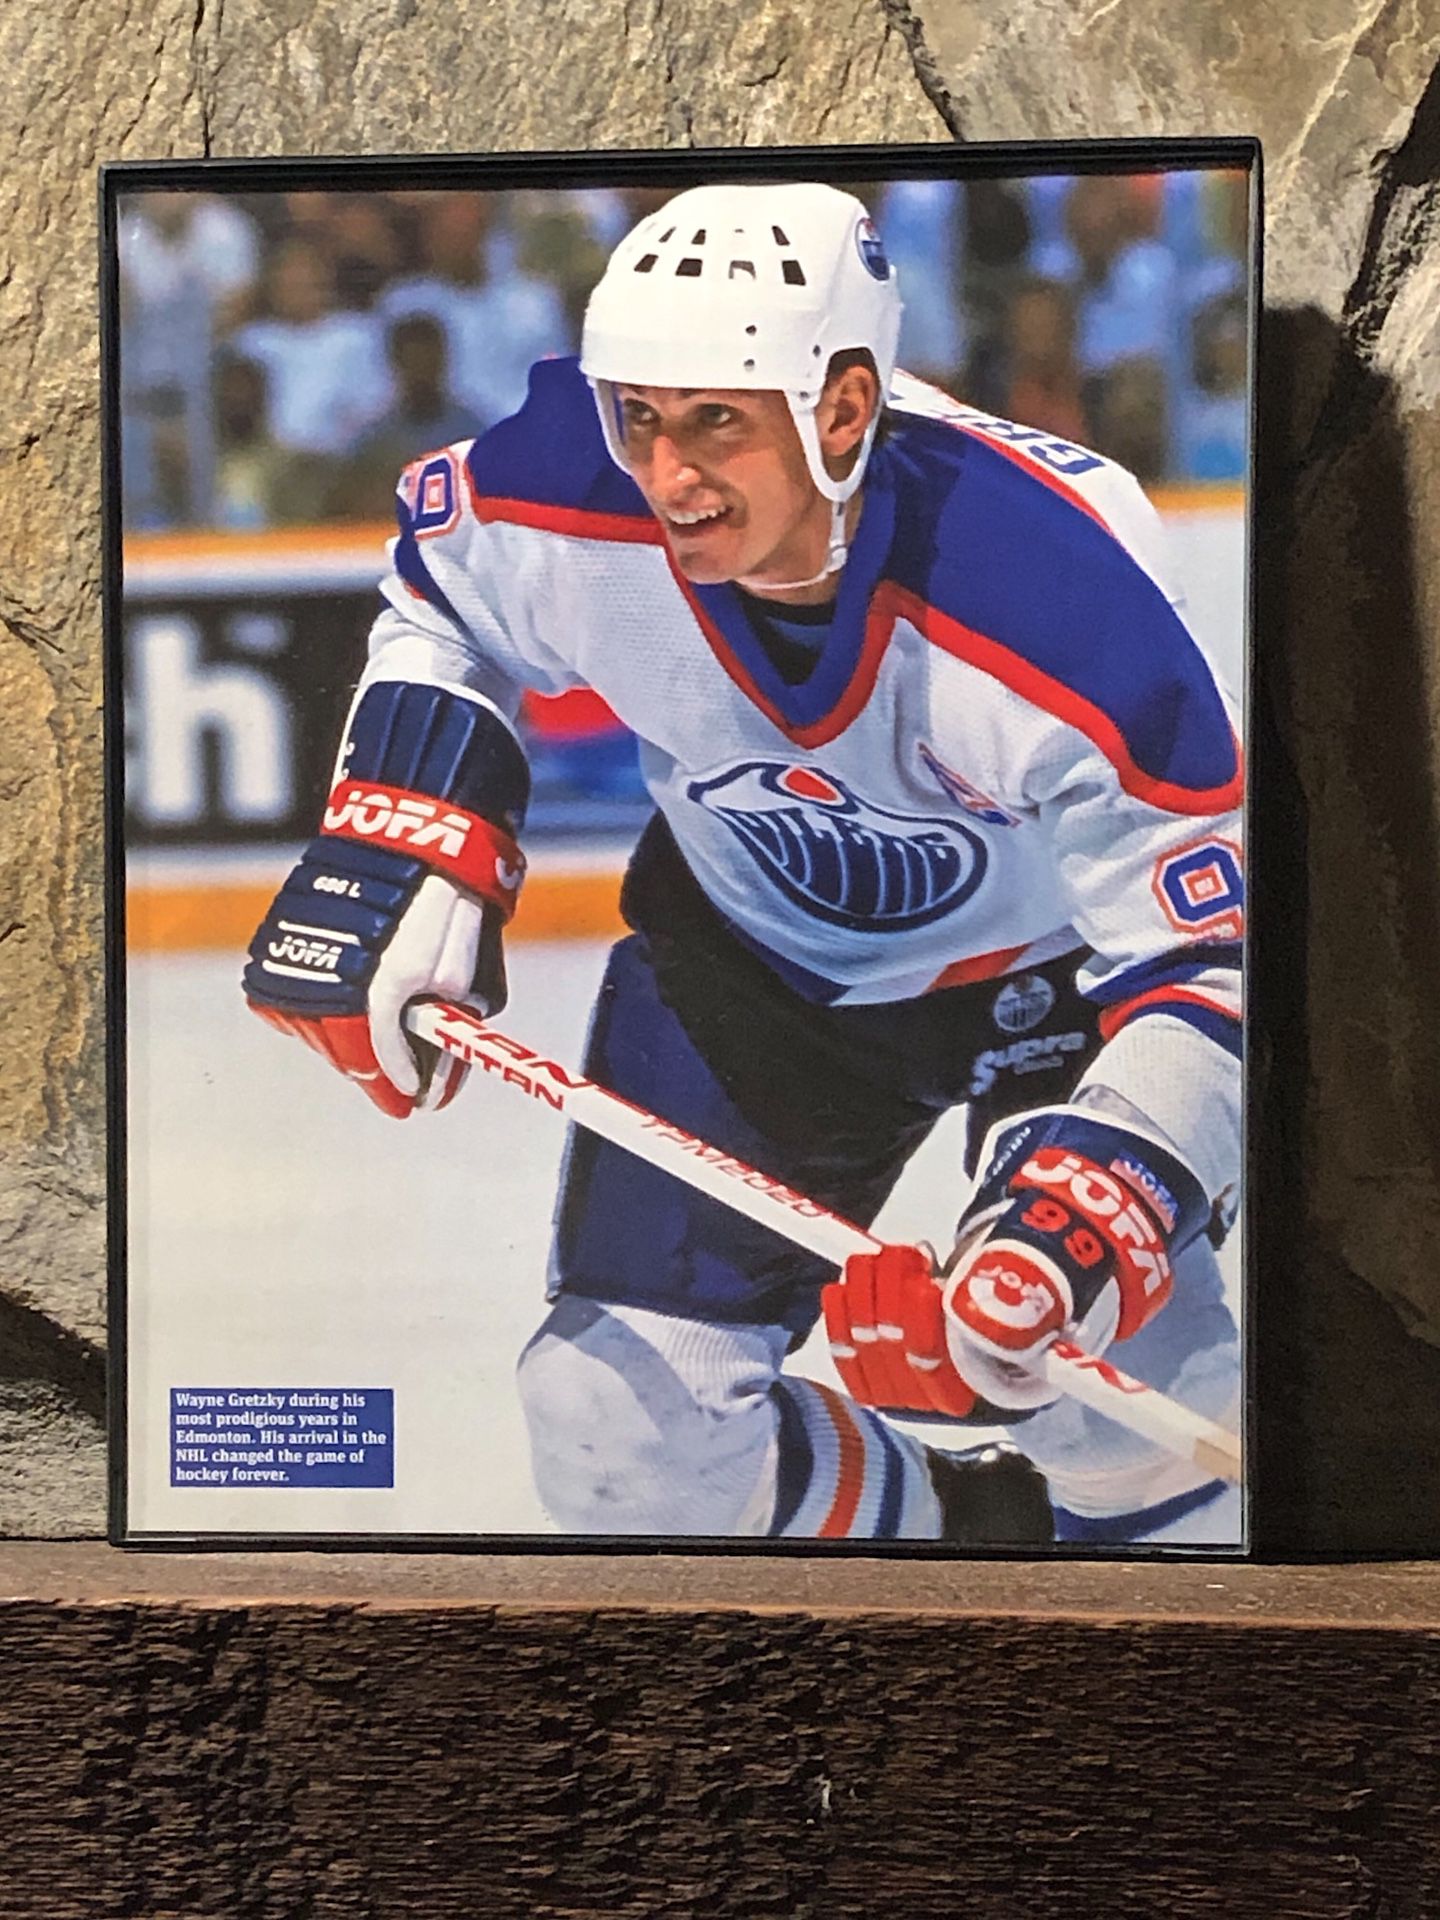 Page from the Past : Picture of Wayne Gretzky in “8x10” glass frame.